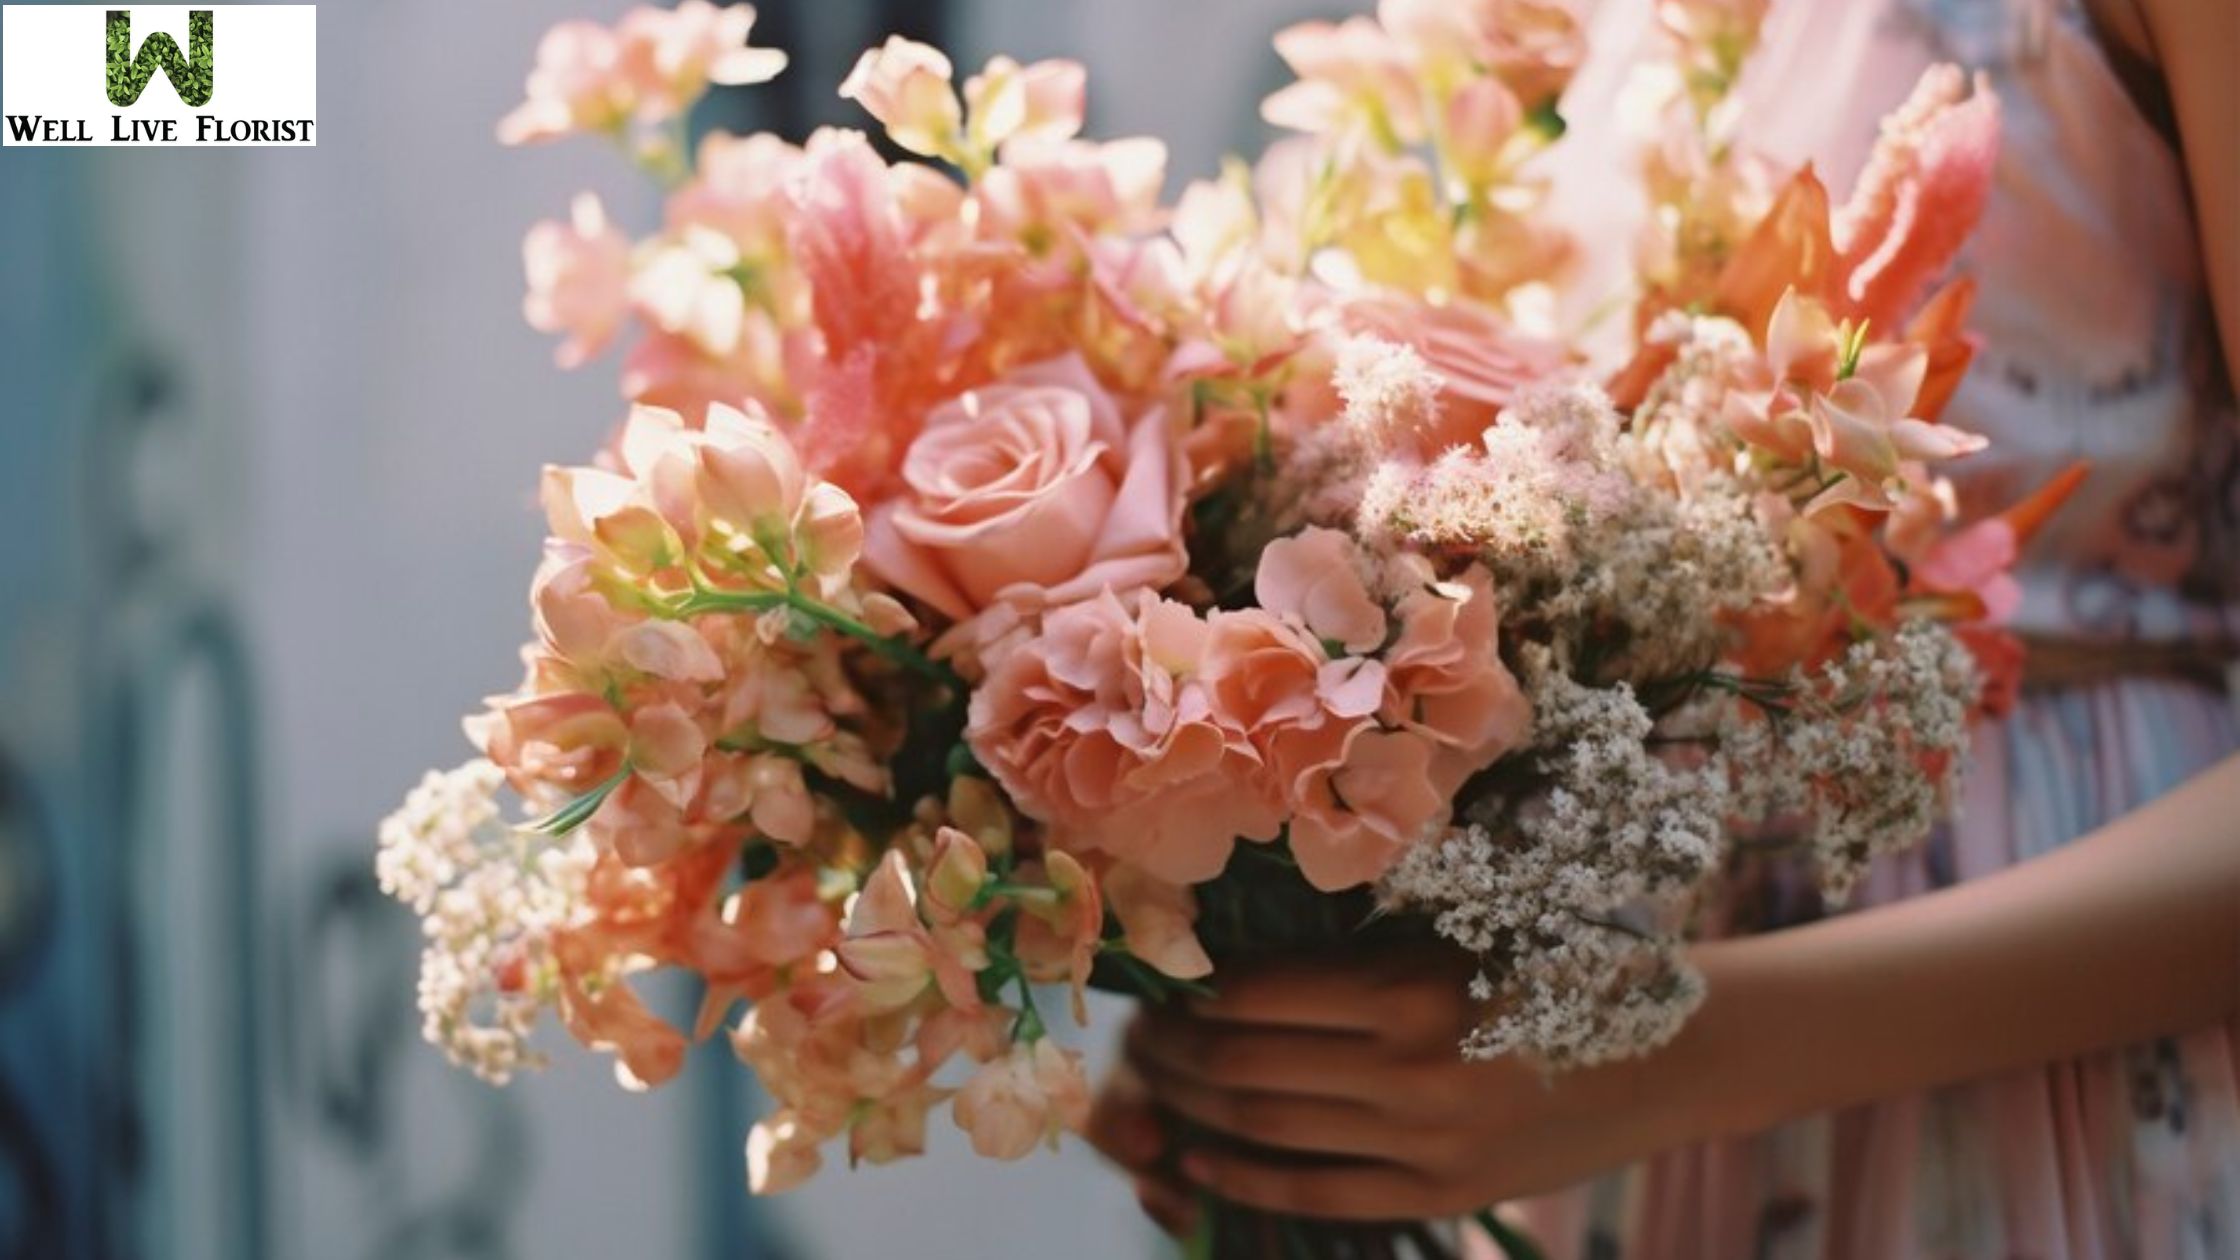 Differences Between Flower Arrangements and Hand Bouquets